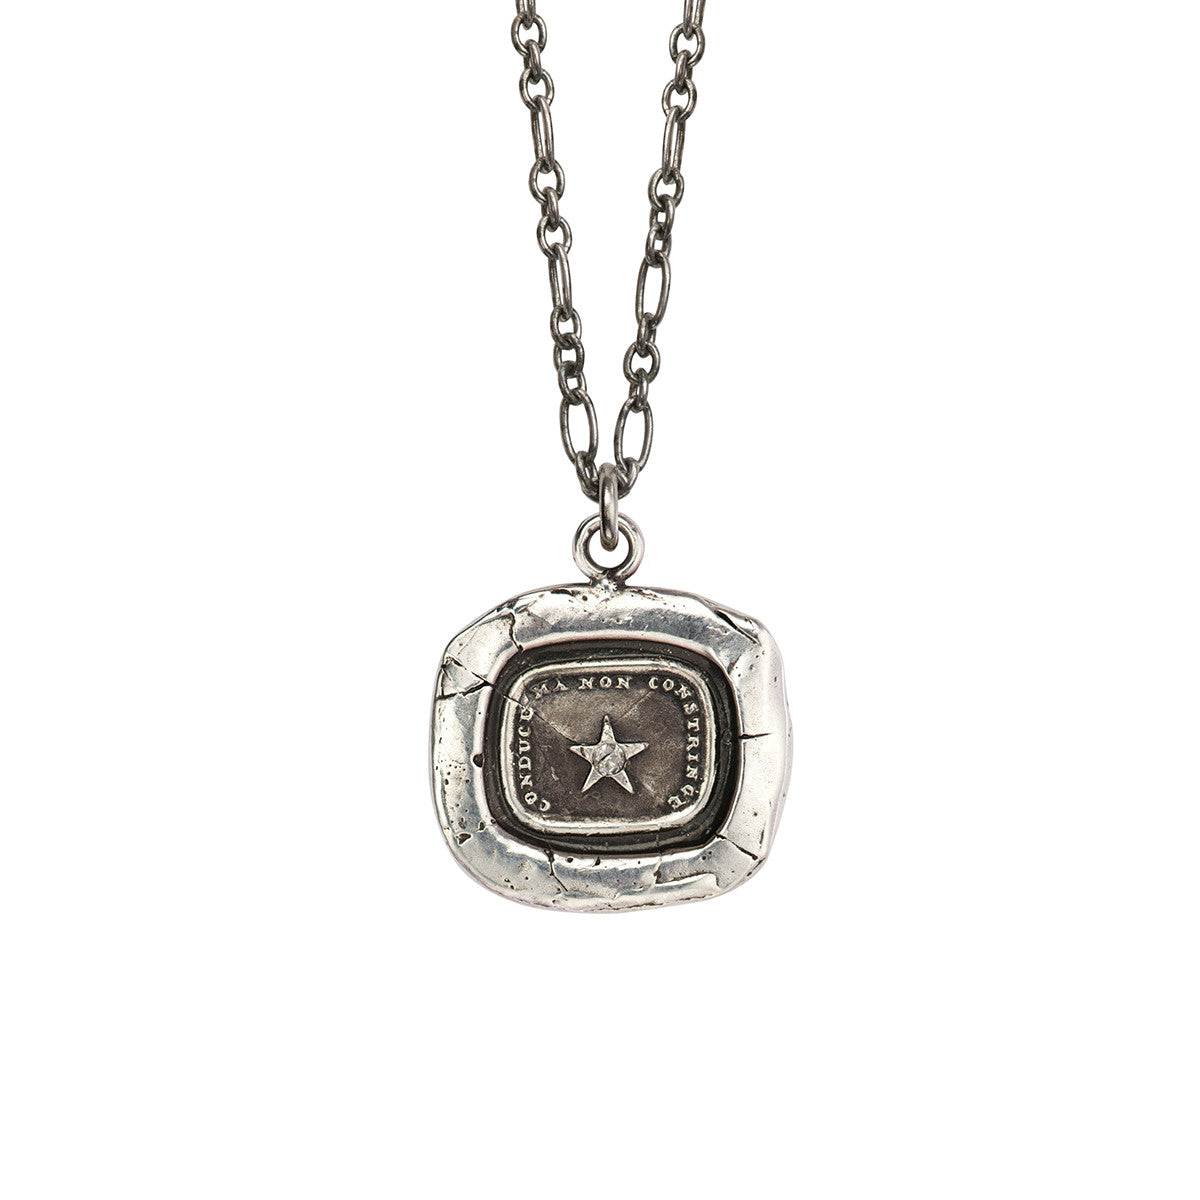 A silver chain with our sterling silver Leadership talisman. This talisman is set with a diamond.